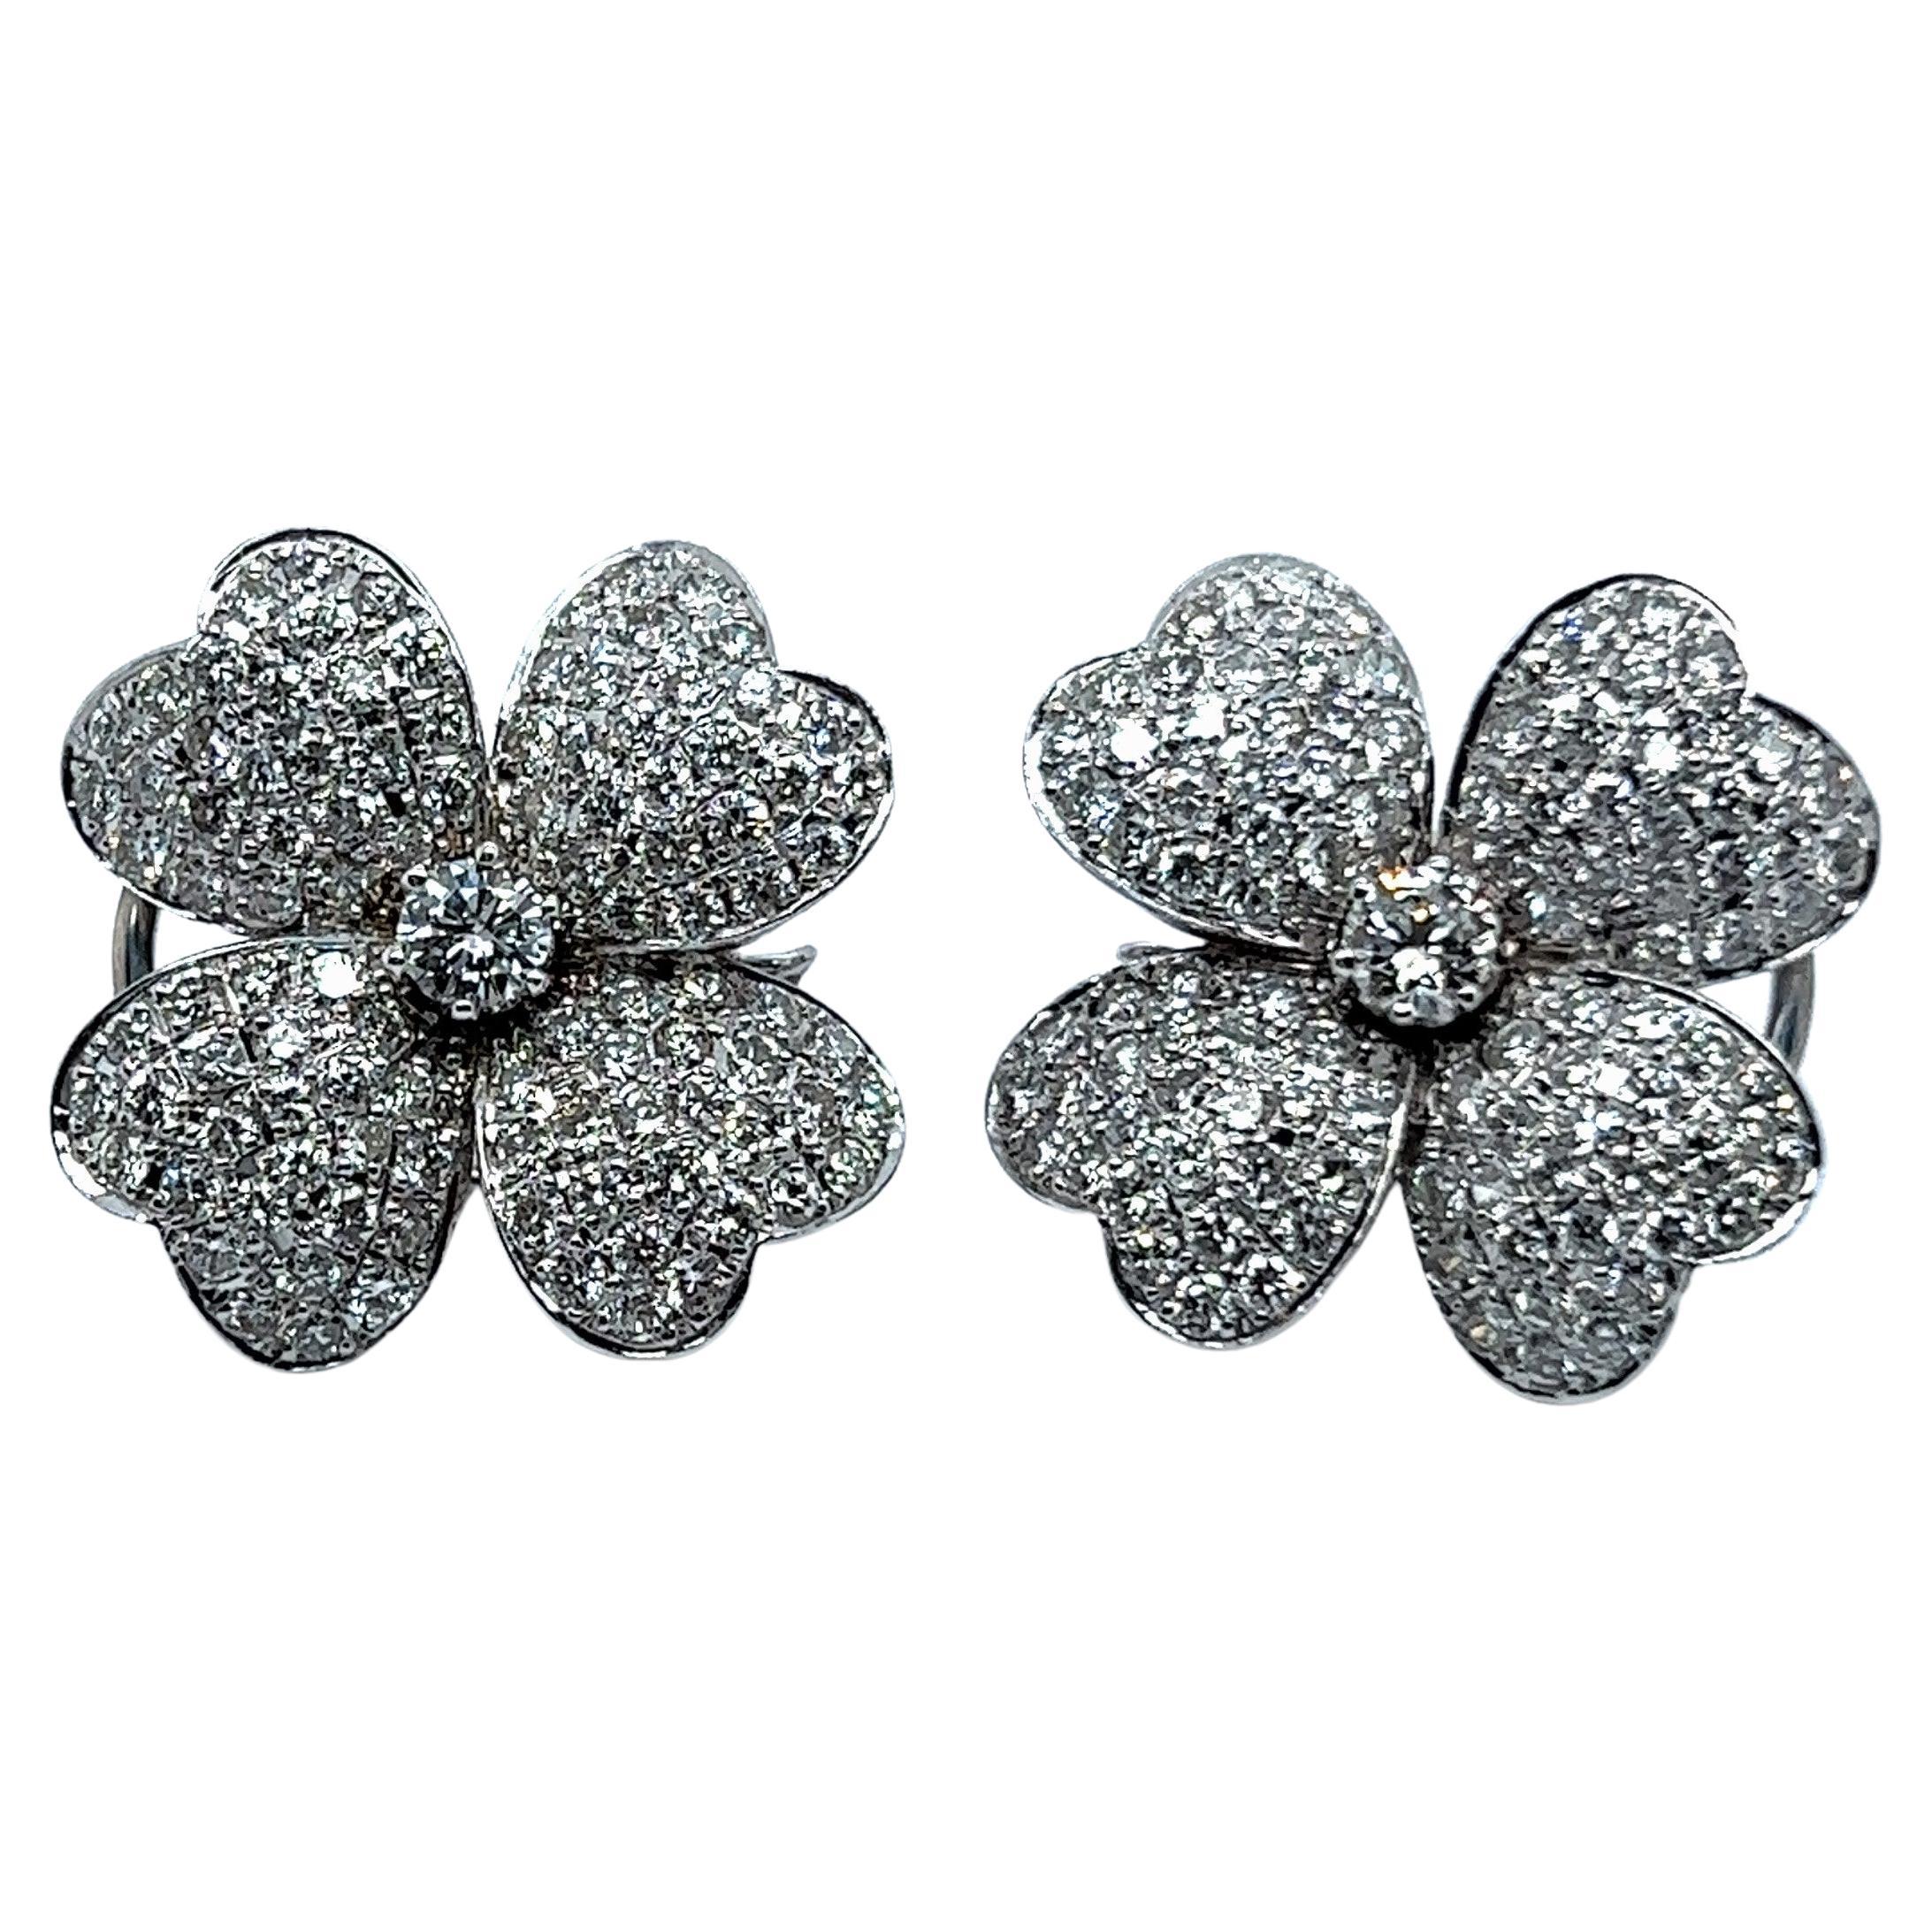 A flower is one of nature's most delicate creations, so it is not a secret that jewellery designers have long found inspiration in them, seeking to capture their fleeting beauty in their art.

This gorgeous pair of floral earrings are just blooming